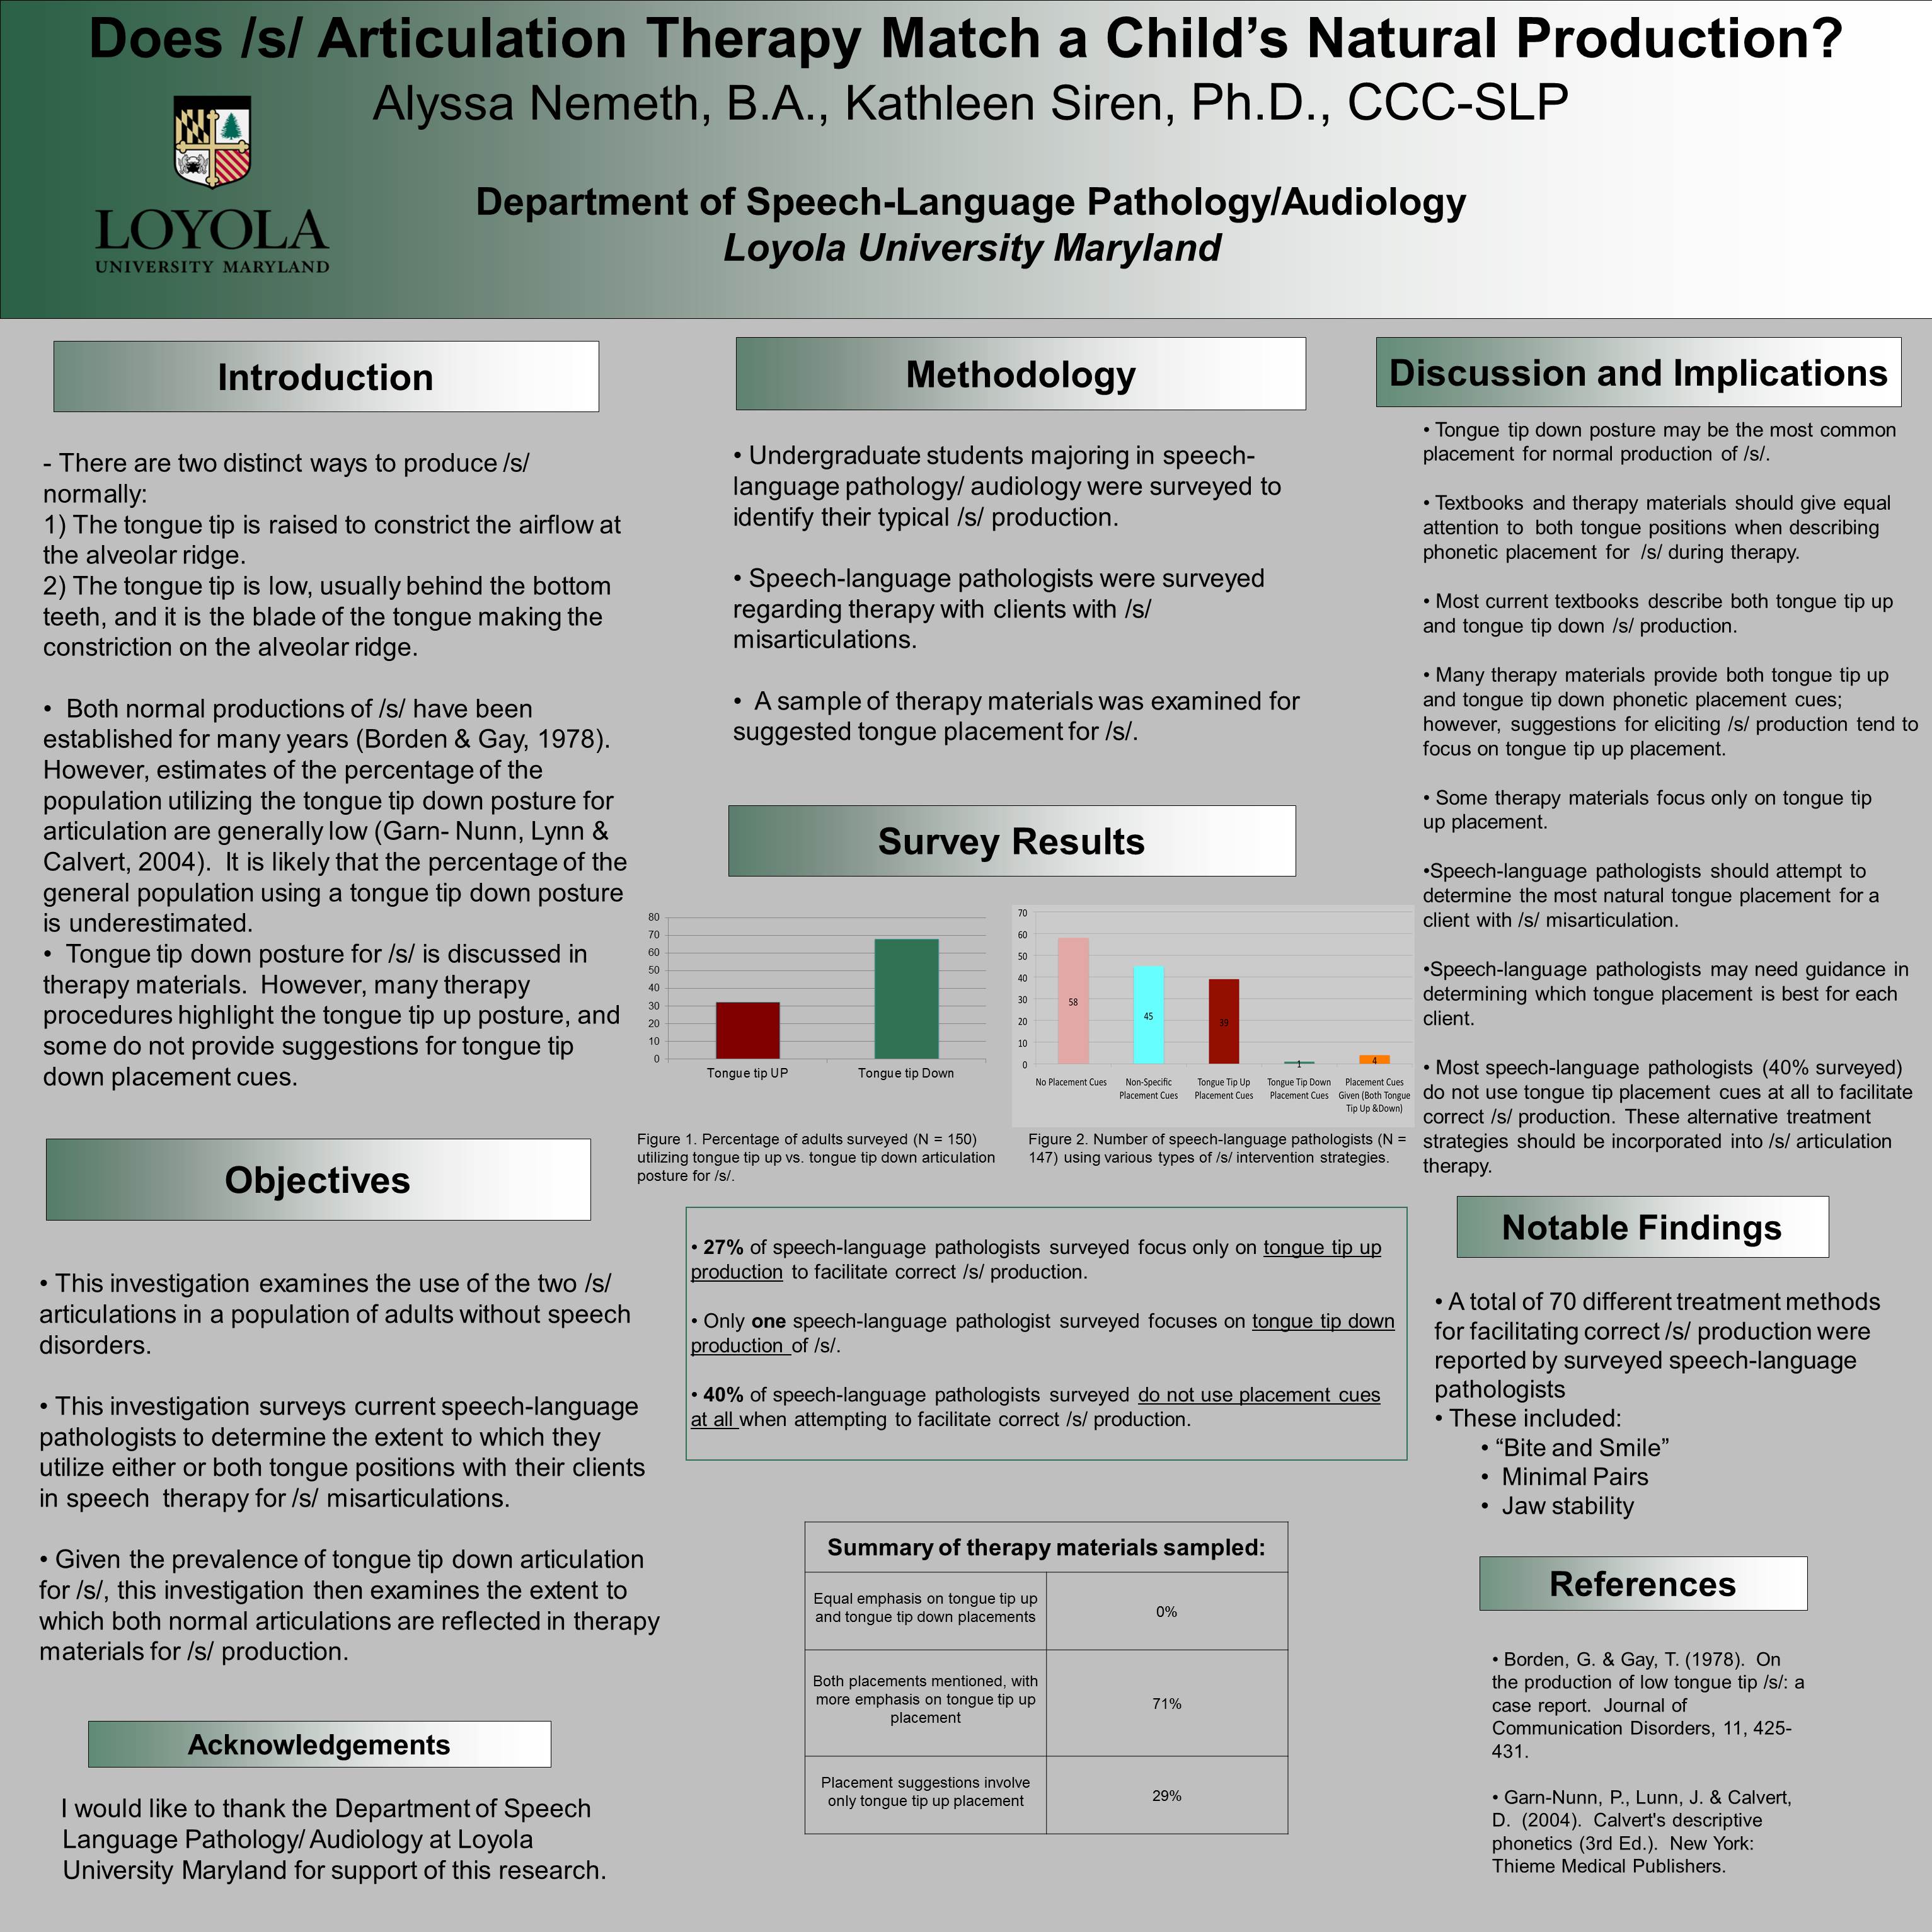 poster image: 'Does /s/ Articulation Therapy Match a Child's Natural Production?'